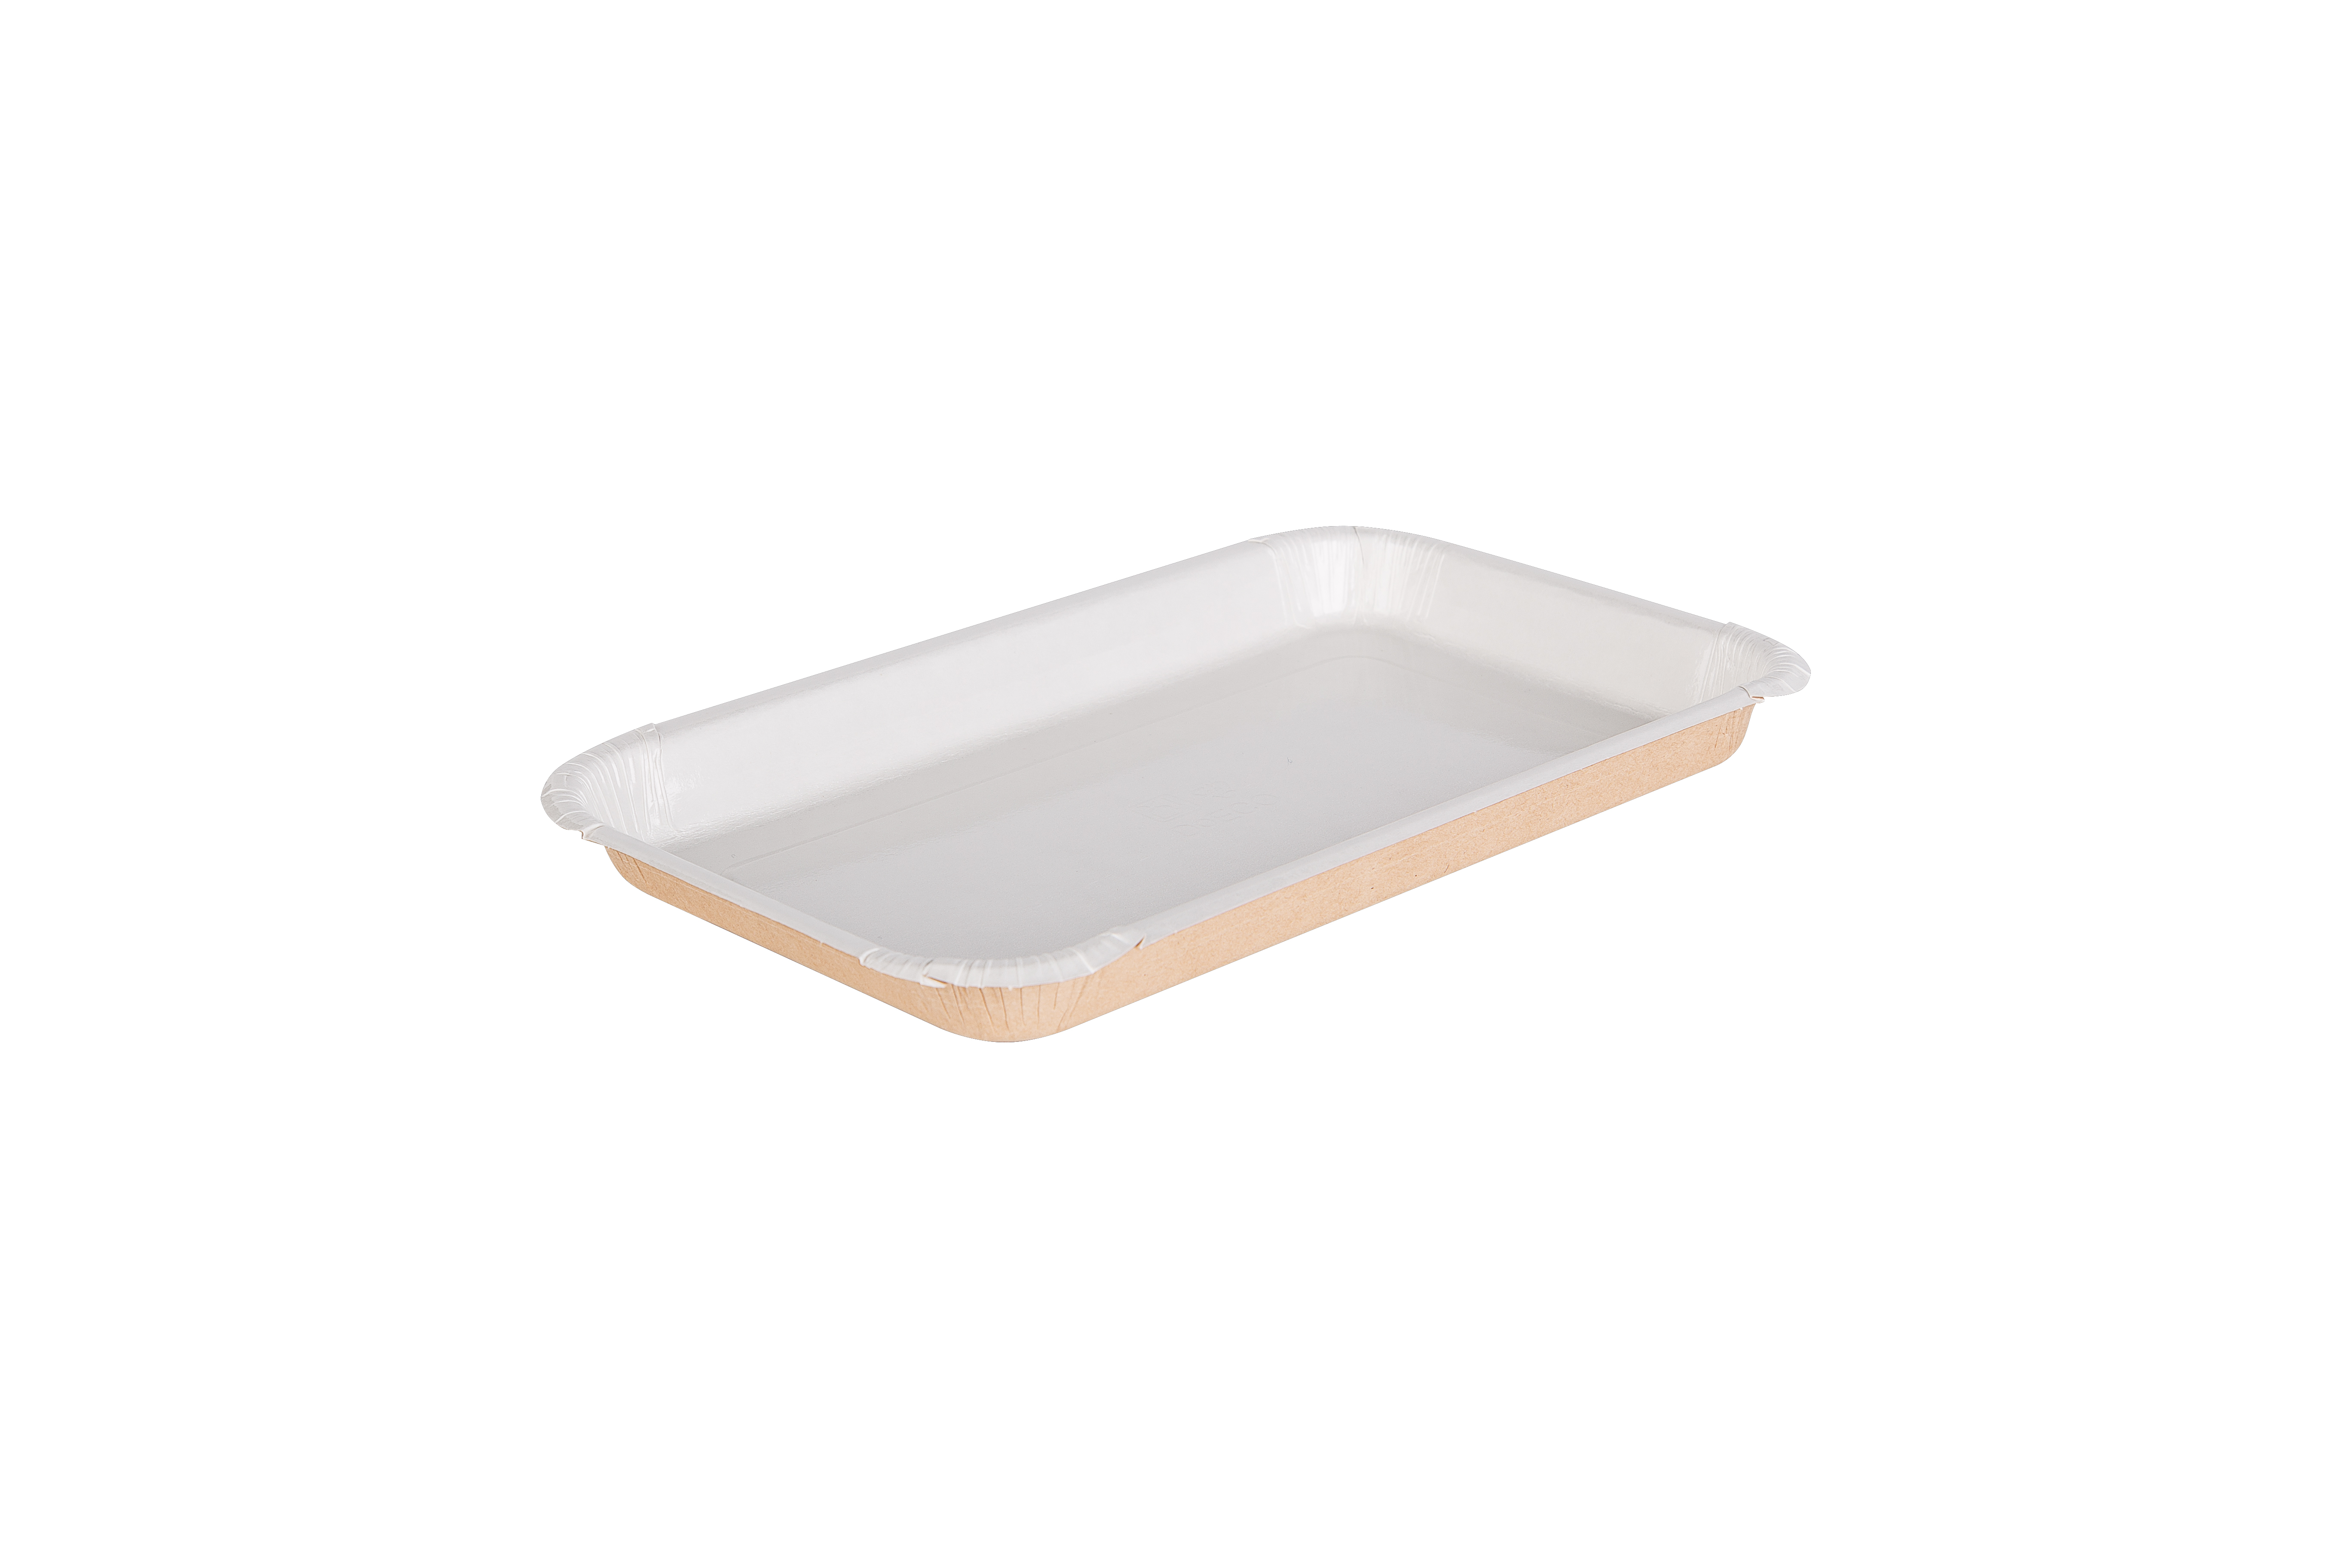 OSQ PLATTER 400 tray for cooking, serving and packing cuts, vegetables